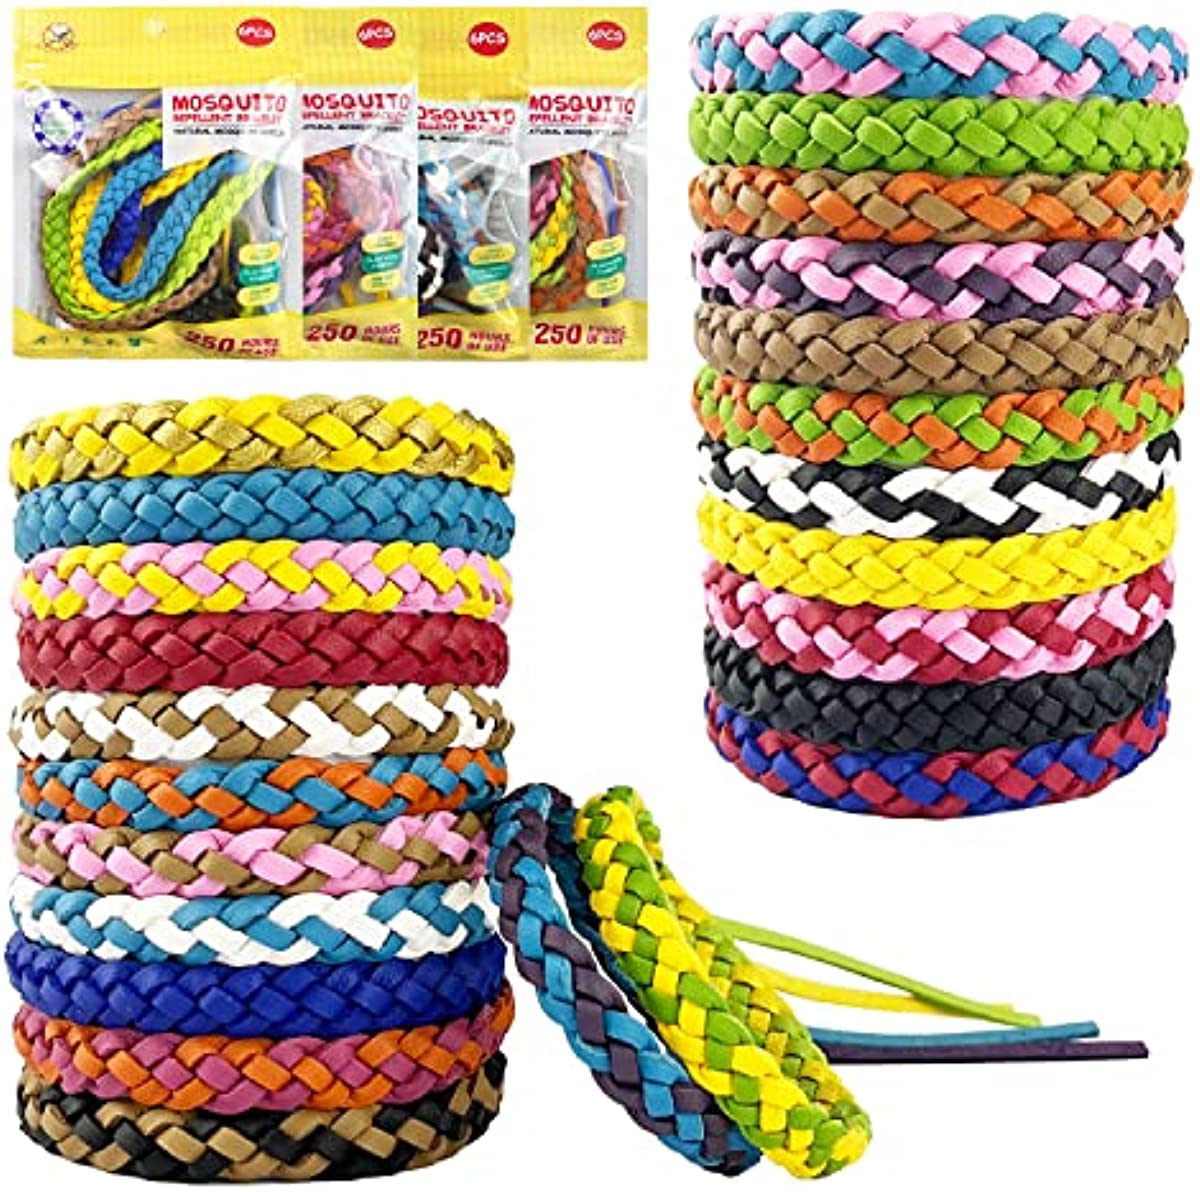 Mosquito Repellent Bracelets 24 Pack, PU Leather Mosquito Repellent Bands, DEET Free Mosquito Wristbands Safe for Adults and Kids Indoor Outdoor Camping Swimming Fishing Traveling